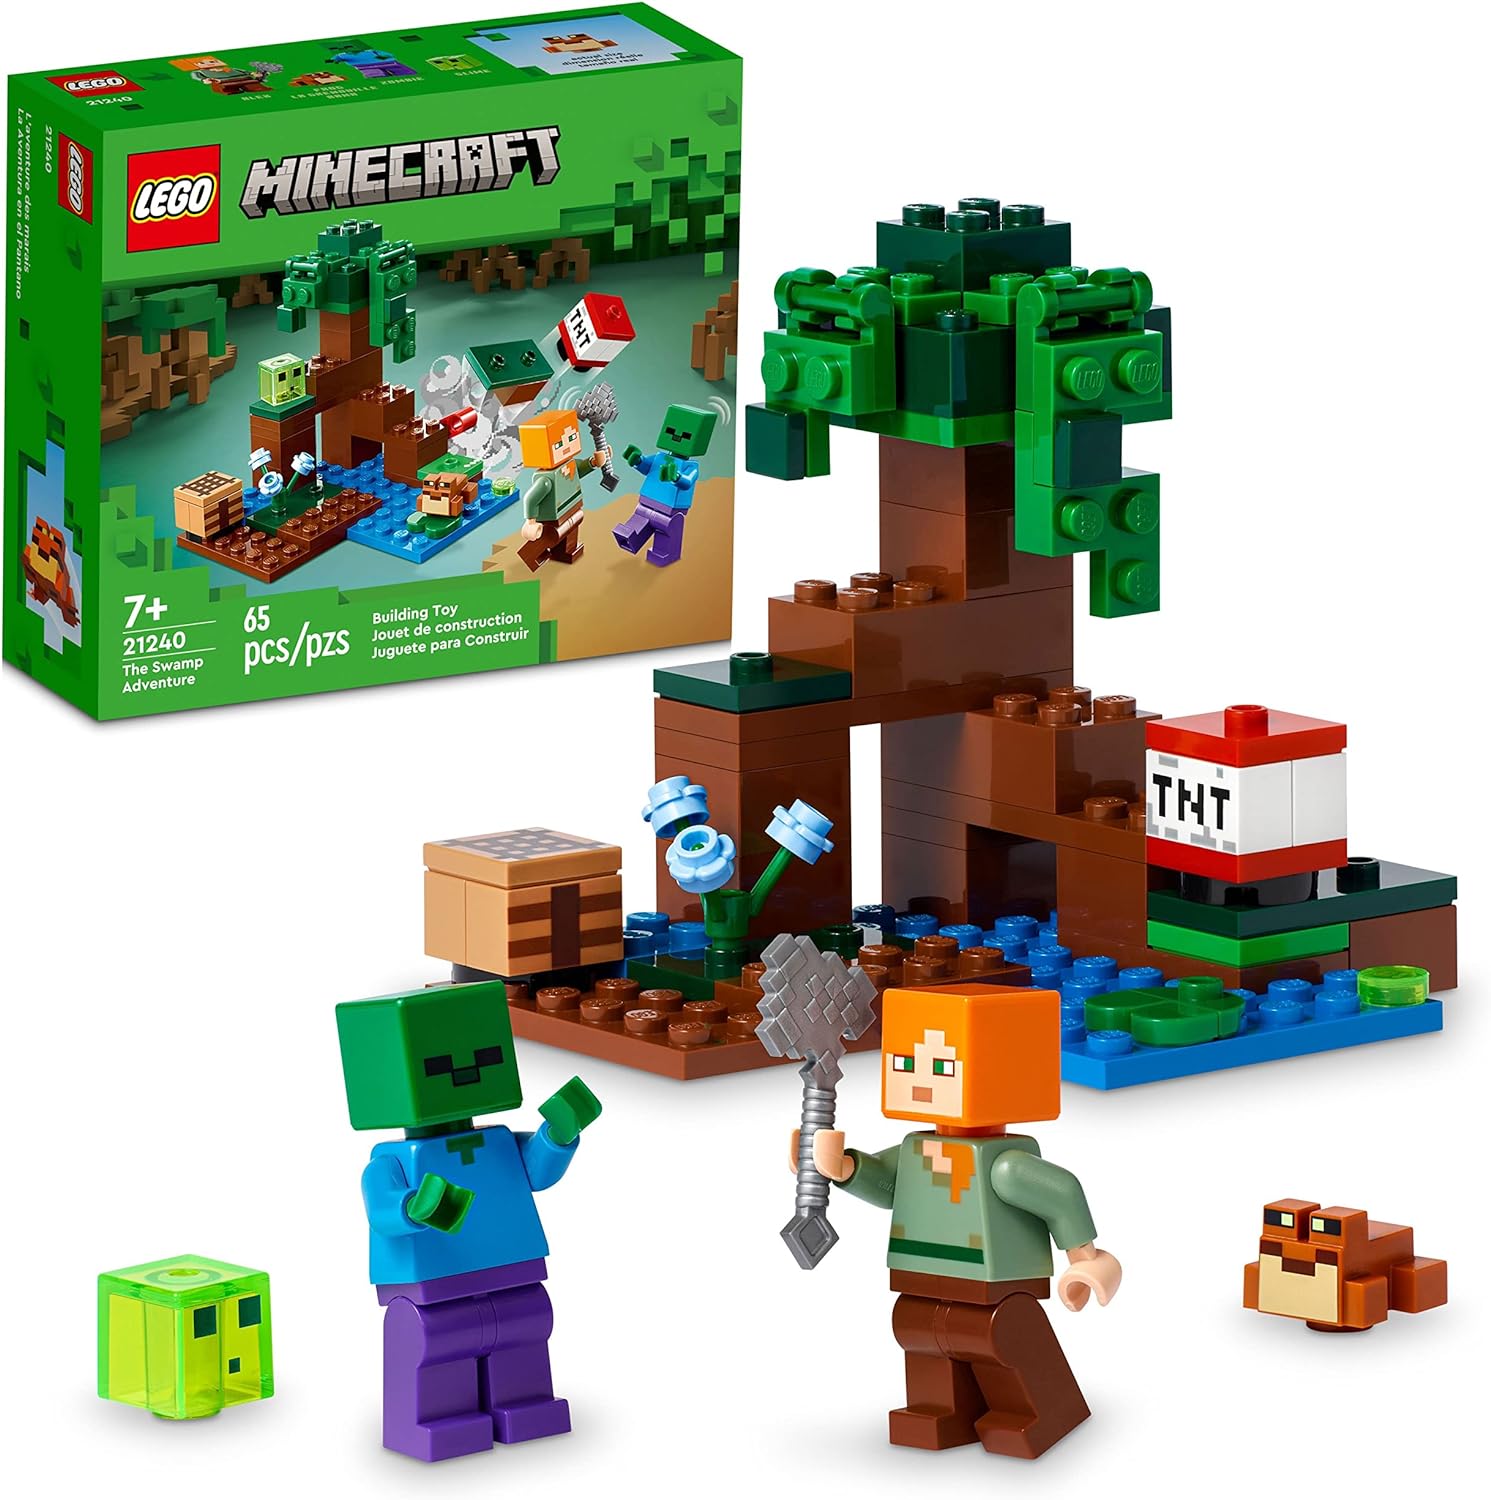 LEGO 21240 Minecraft The Swamp Adventure , Building Game Construction Toy with Alex and Zombie Figures in Biome, Birthday Gift Idea for Kids Ages 8+